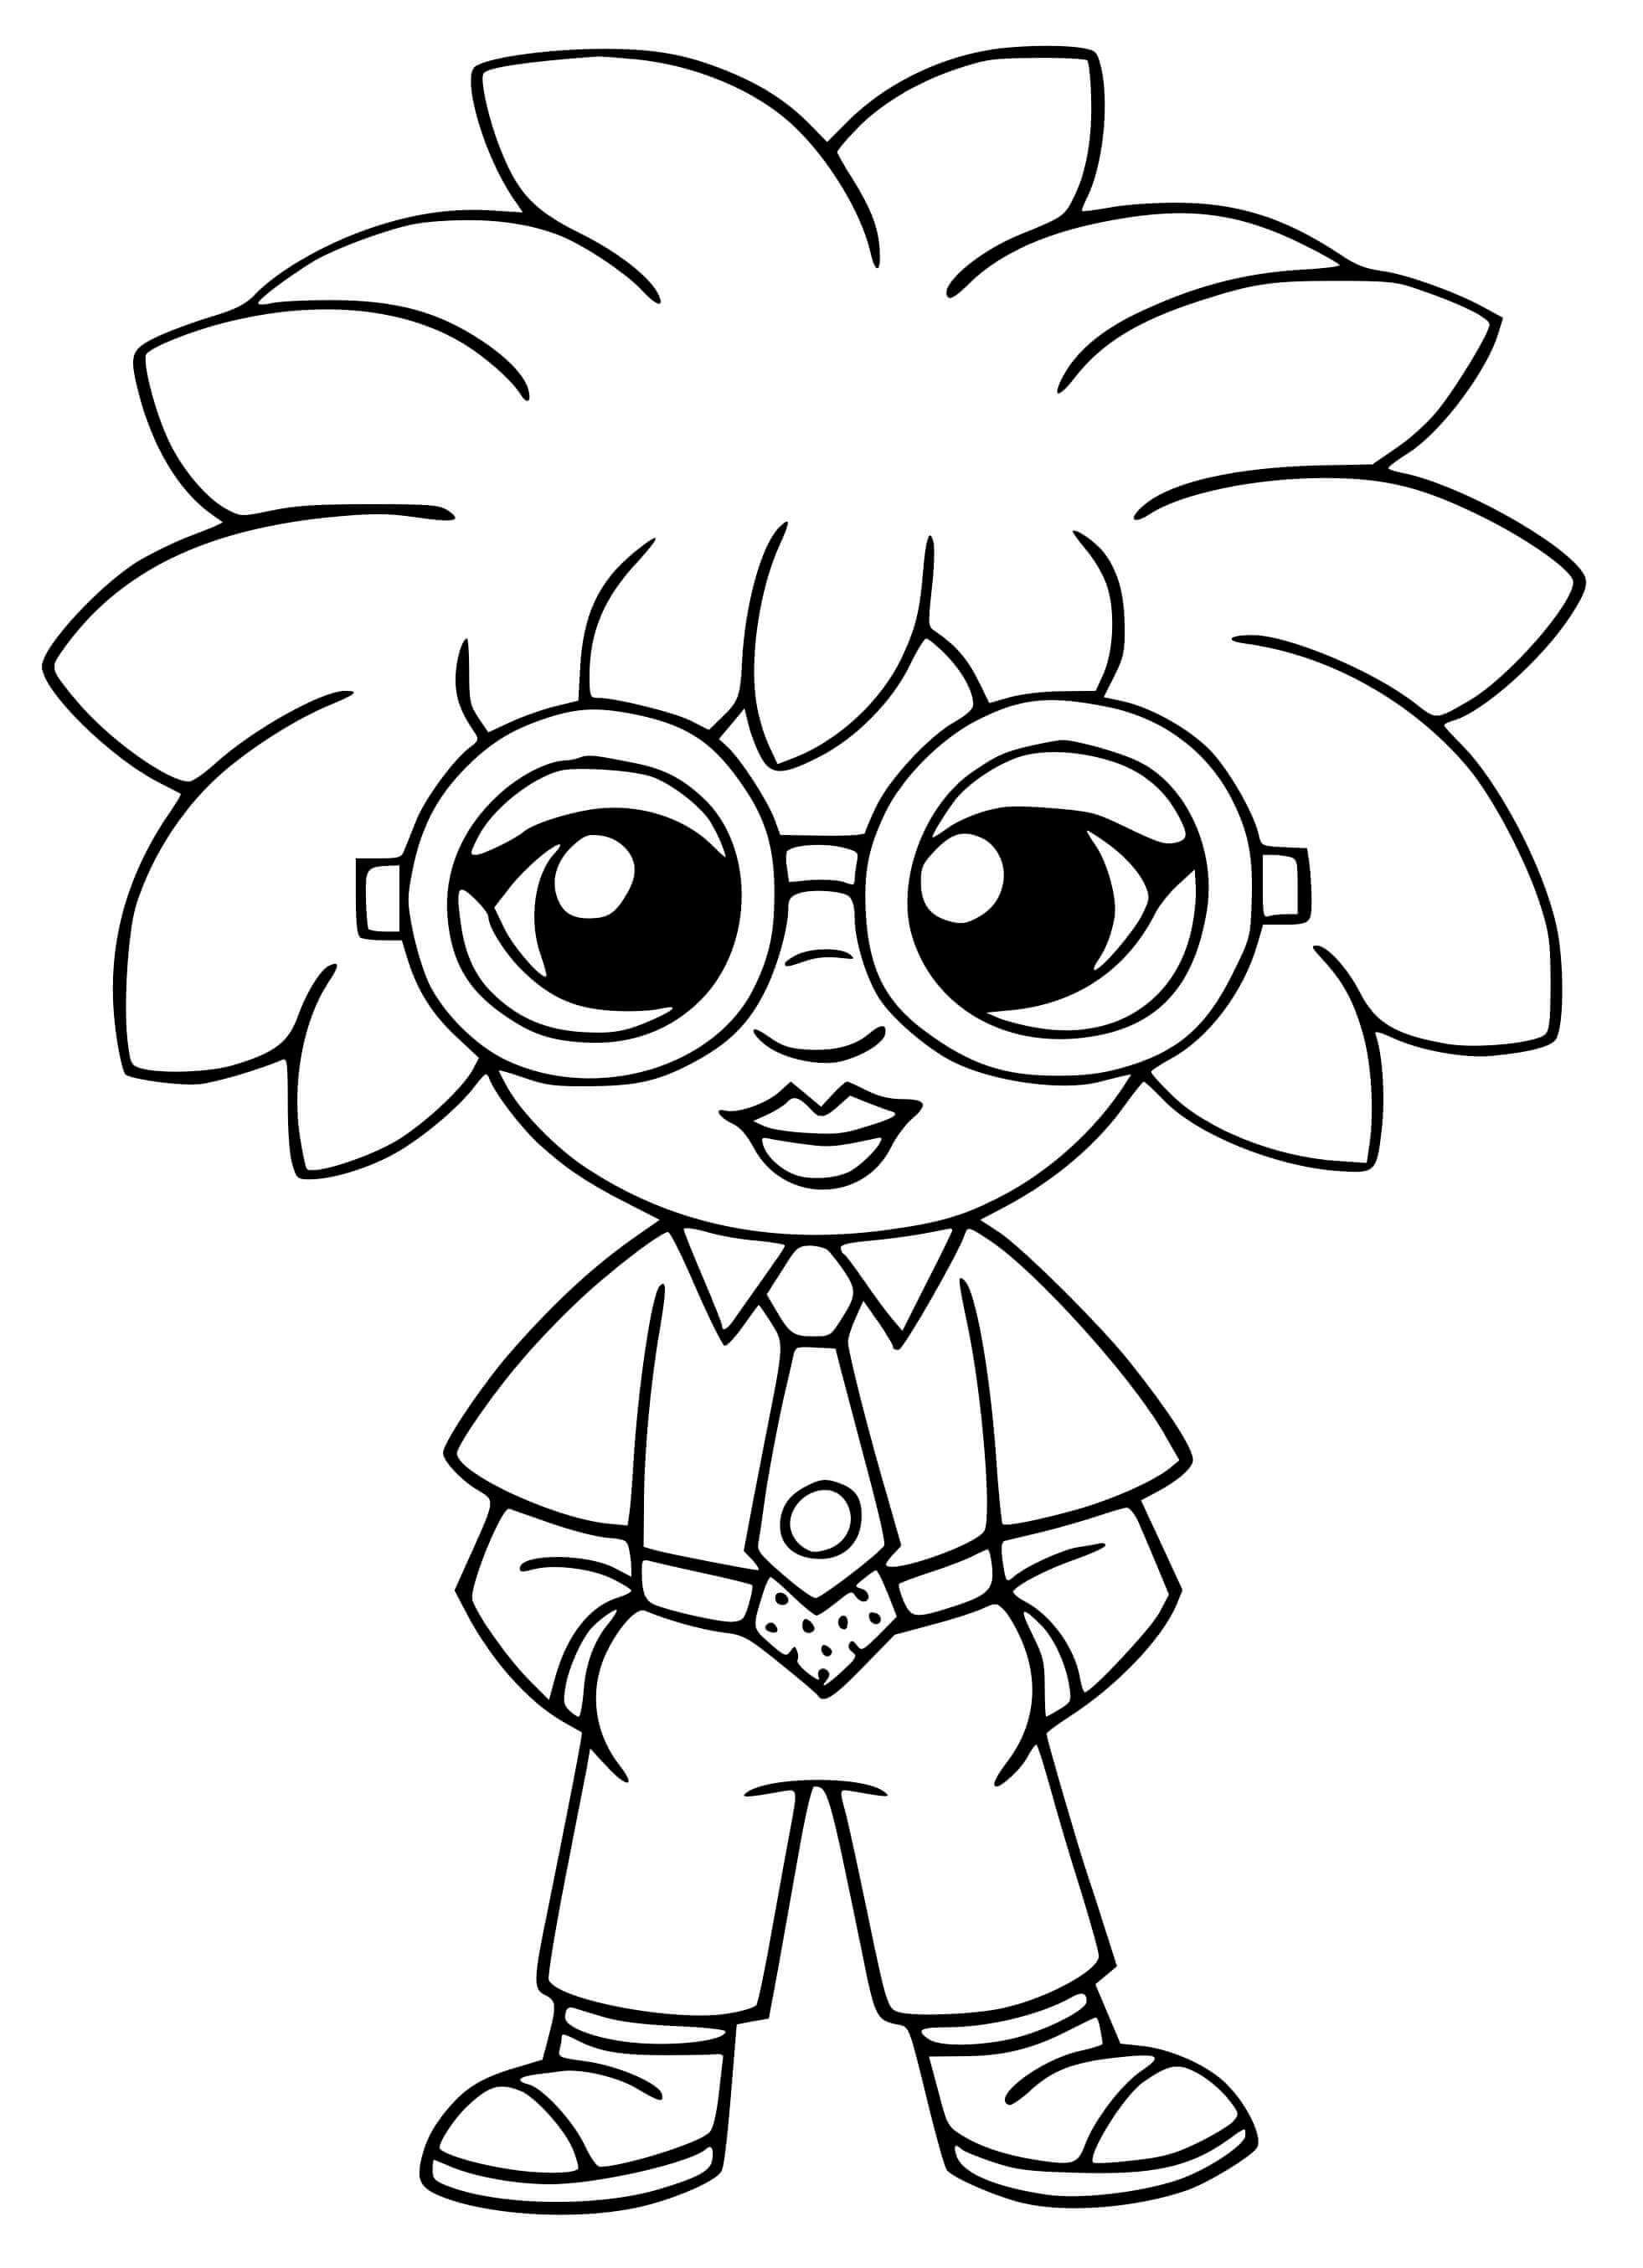 Doctor Slone Fortnite Season 7 Coloring Page